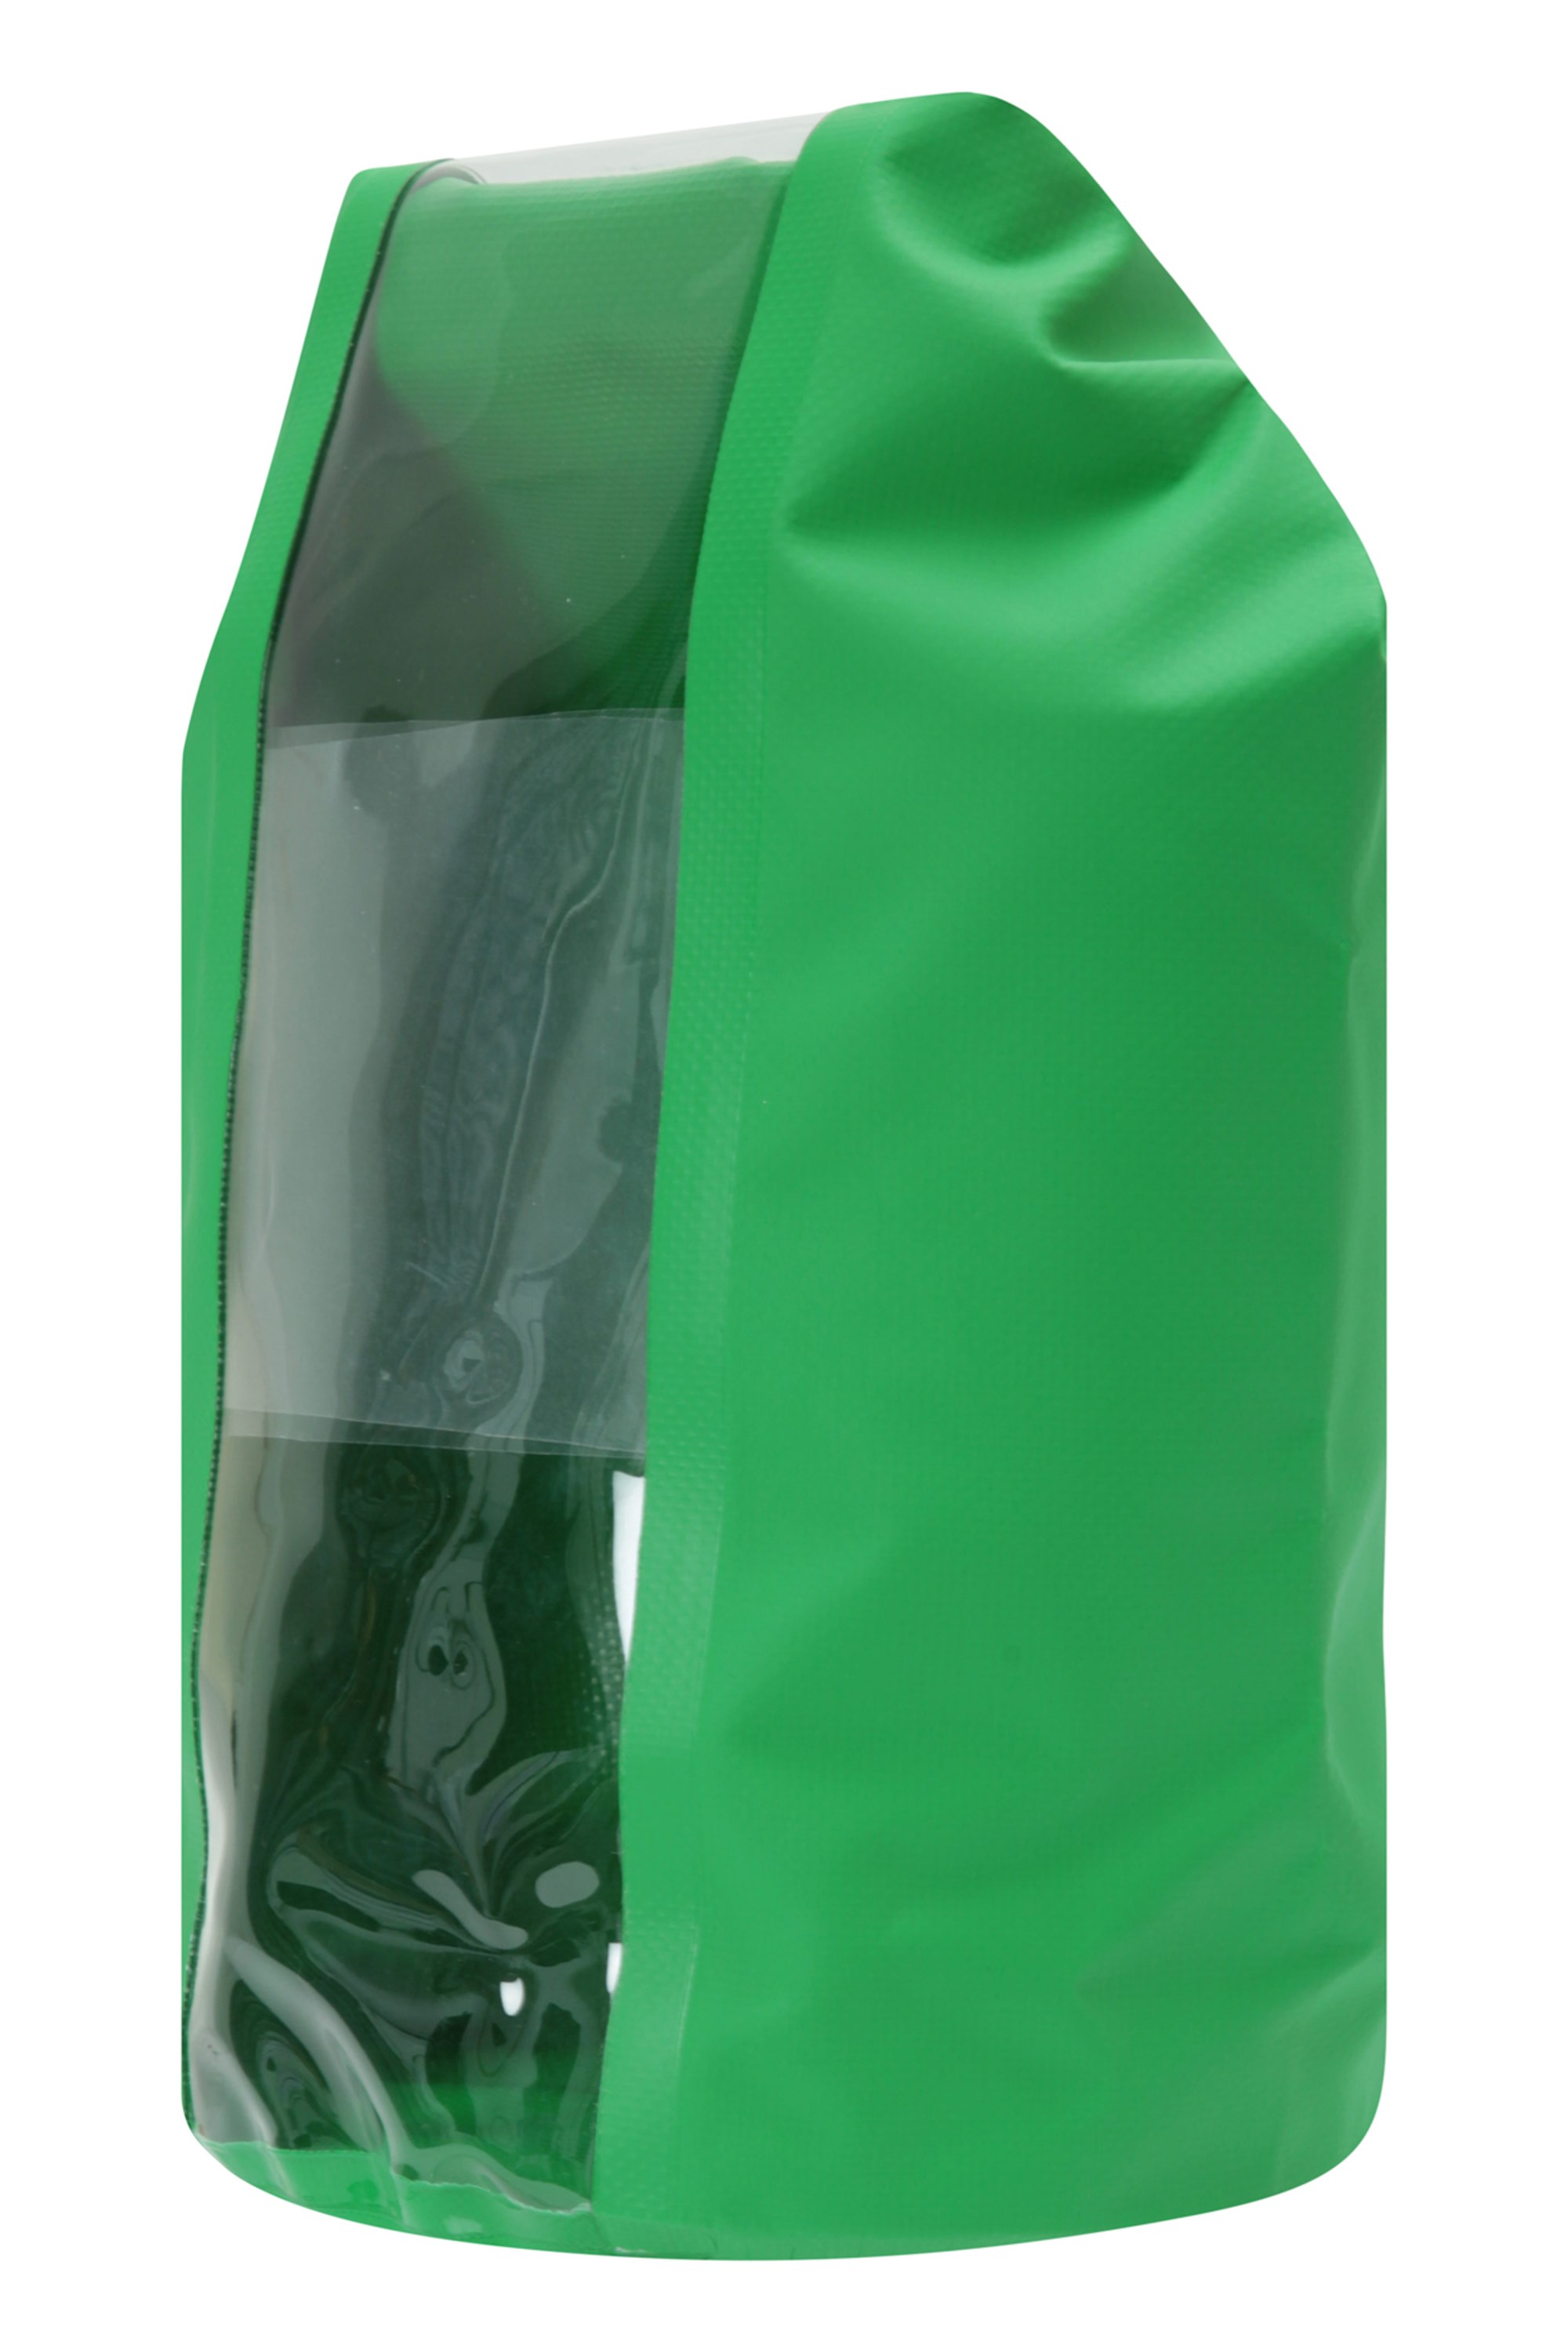 Roll Top Closure Details about   Mountain Warehouse PVC Dry Bag 5L Compact with Welded Seams 